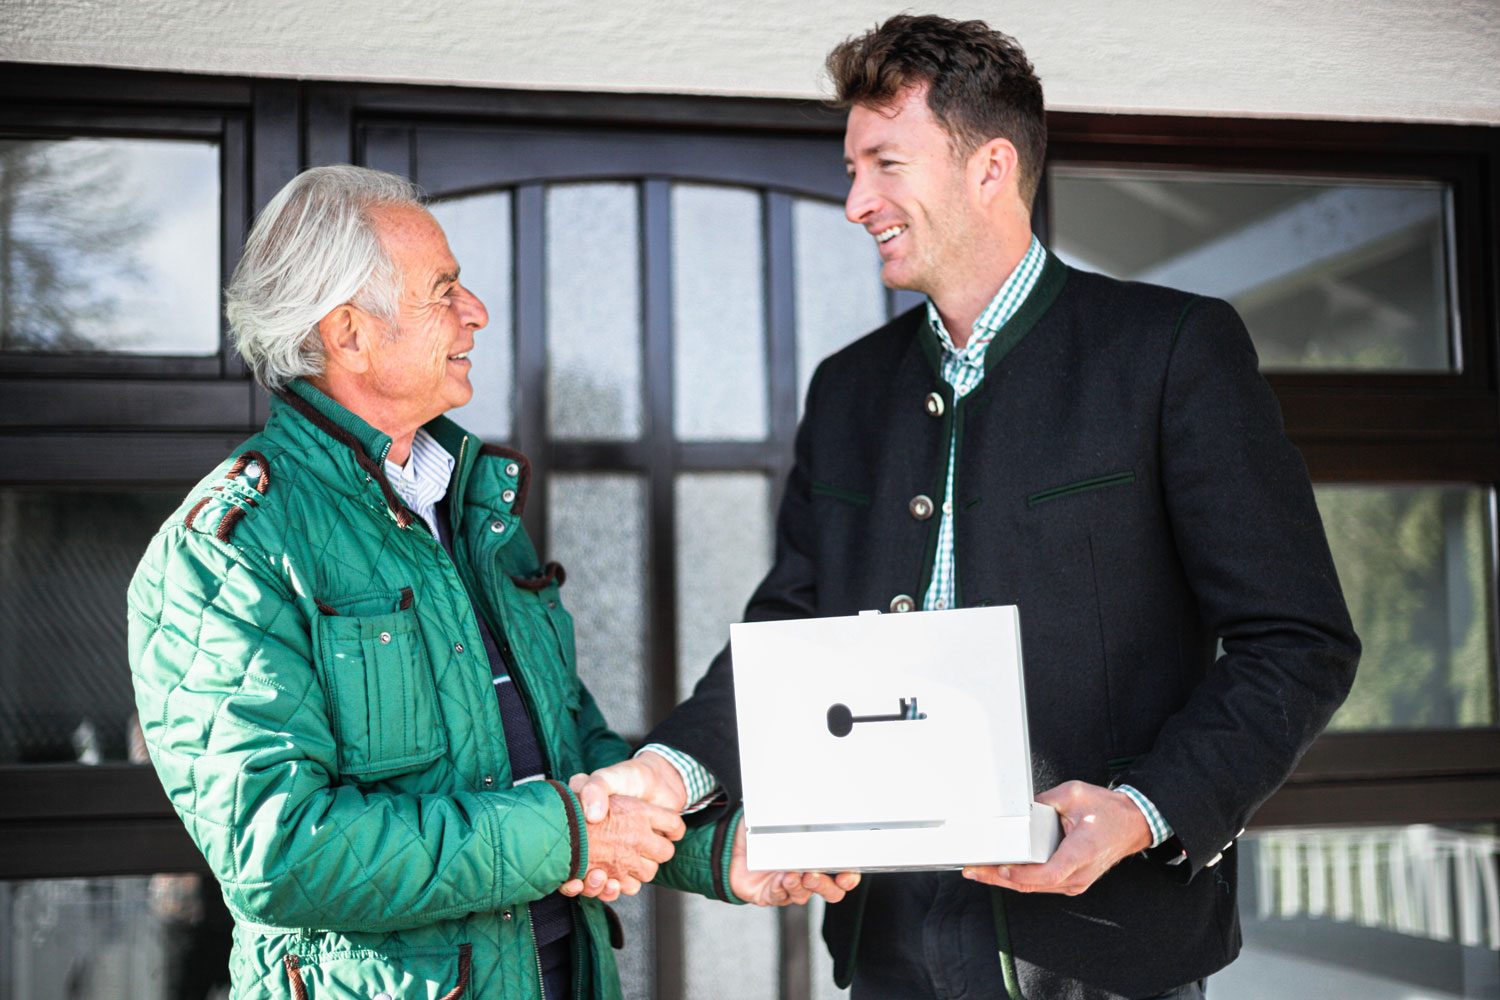 A man shaking hands with an older man holding a box at Gersin Immobilien.